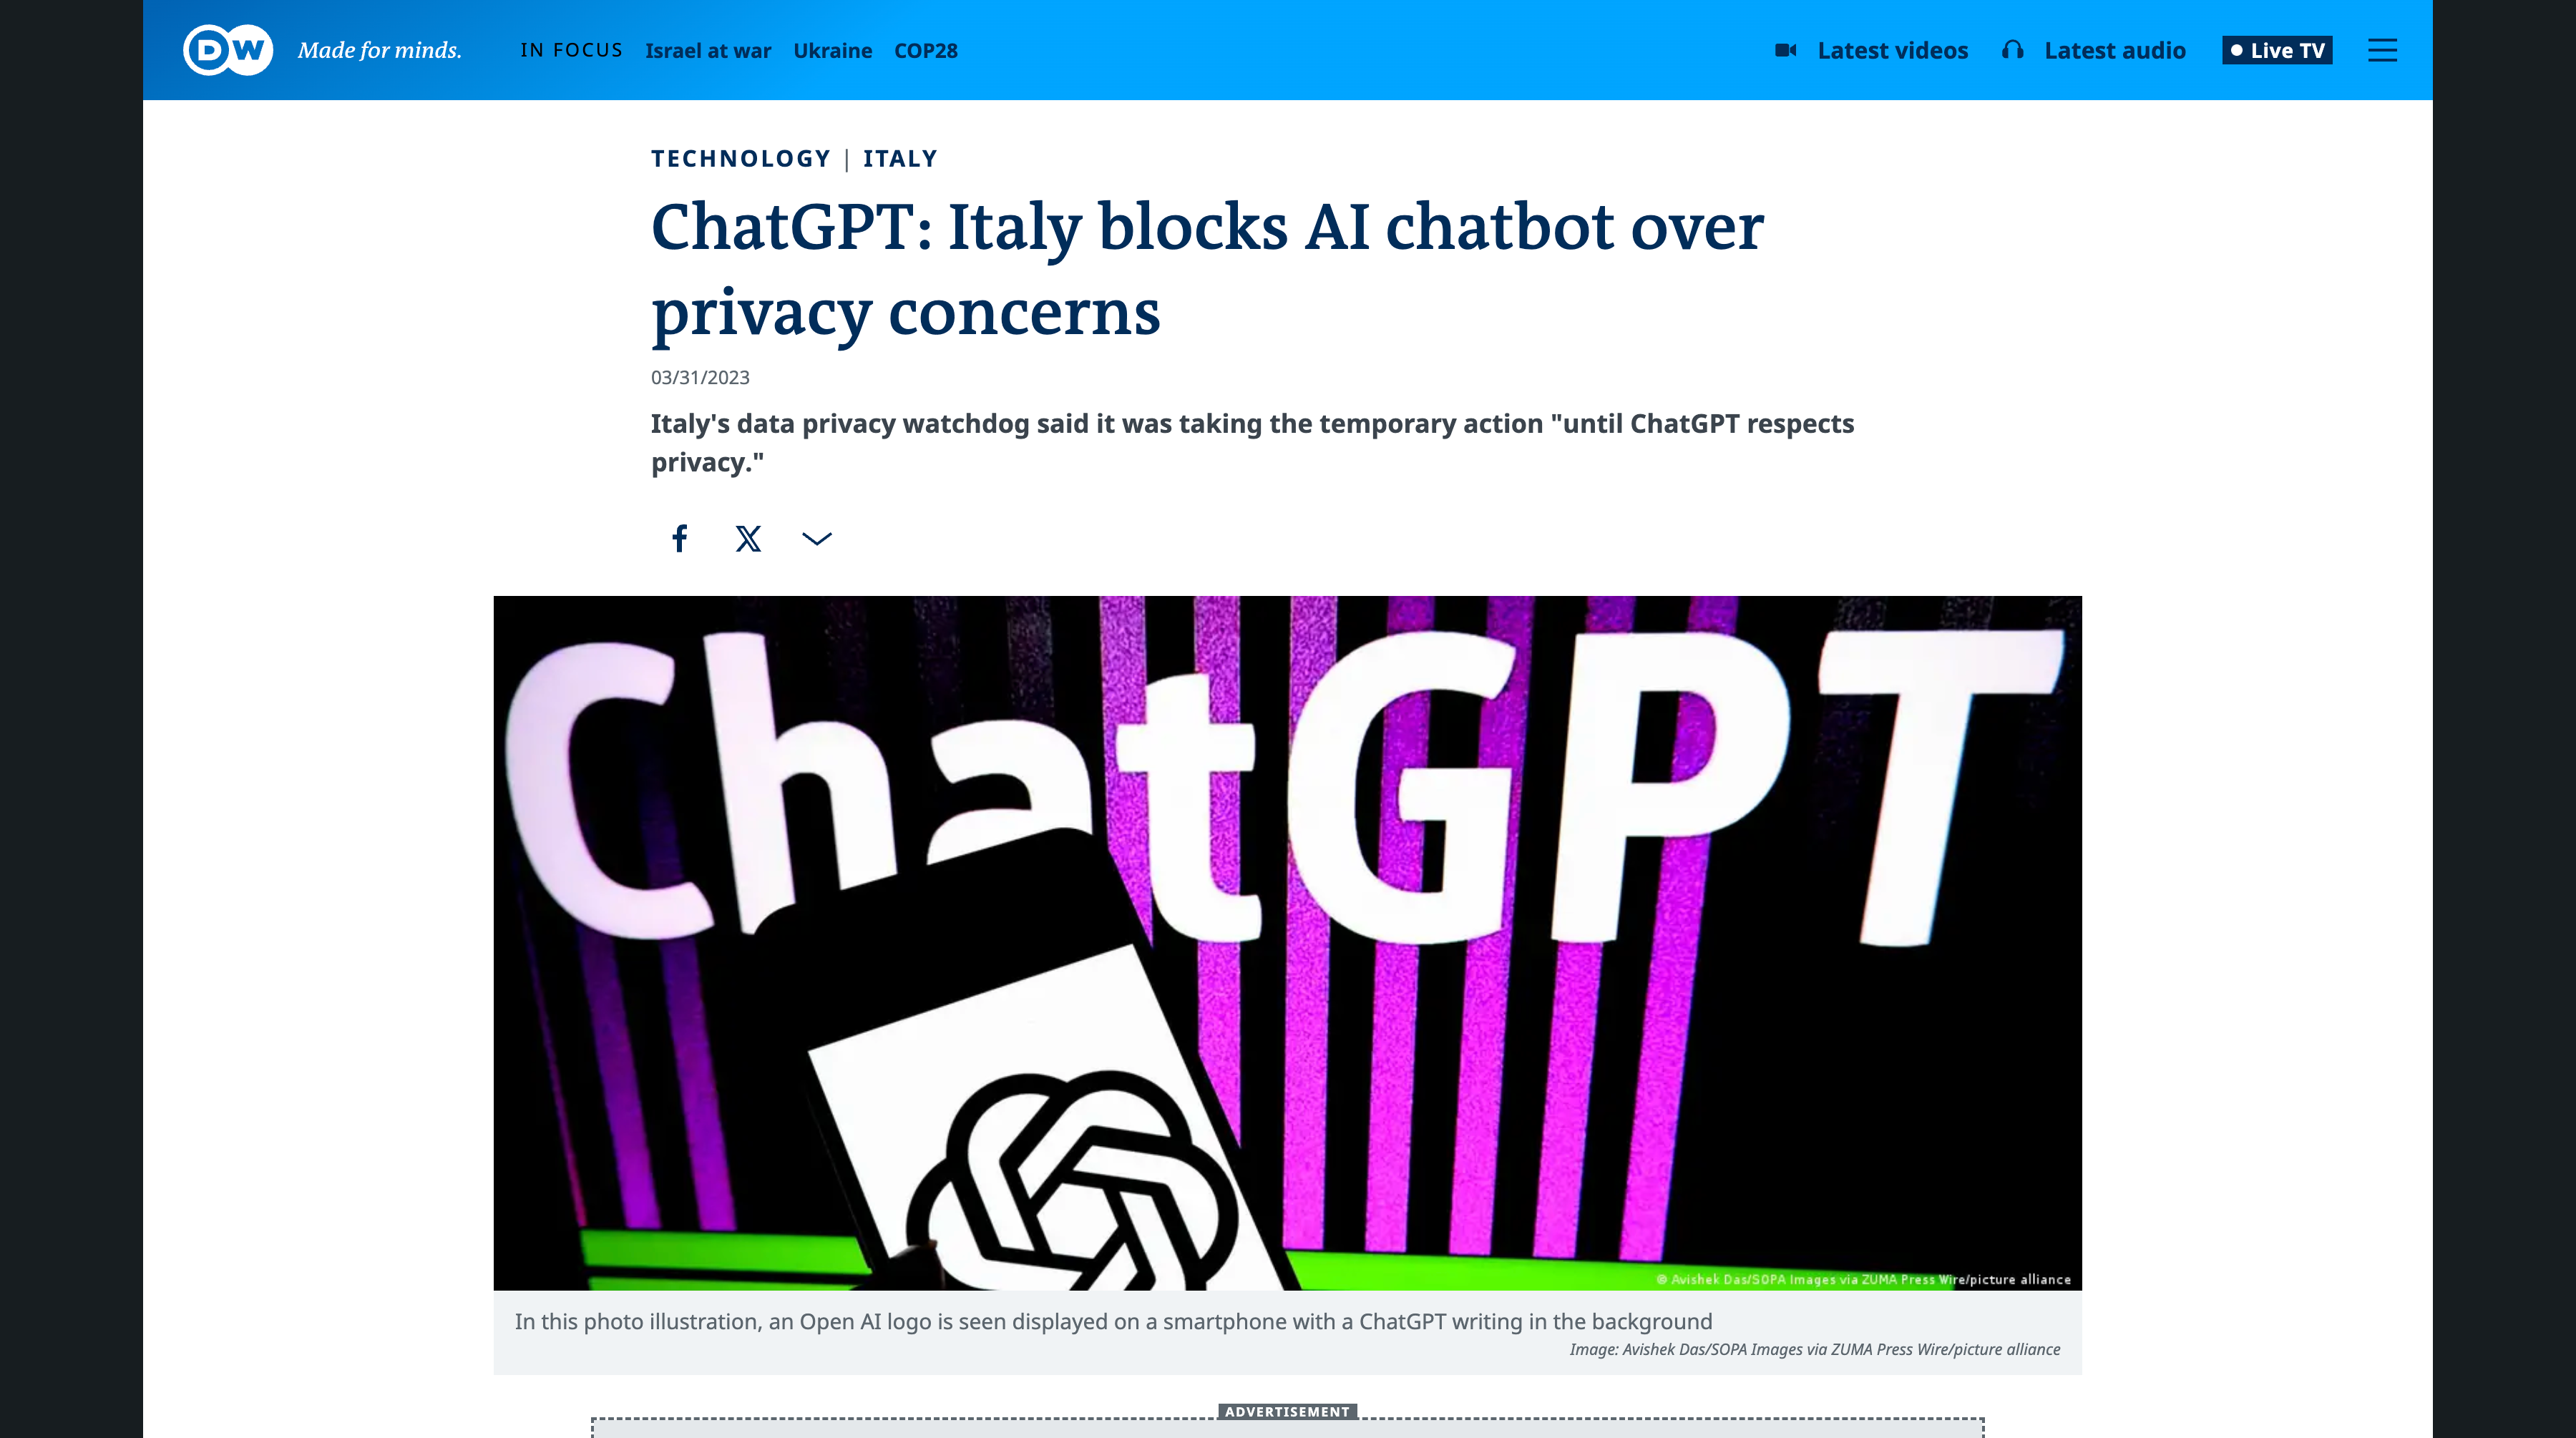 ChatGPT: Italy blocks AI chatbot over privacy concerns